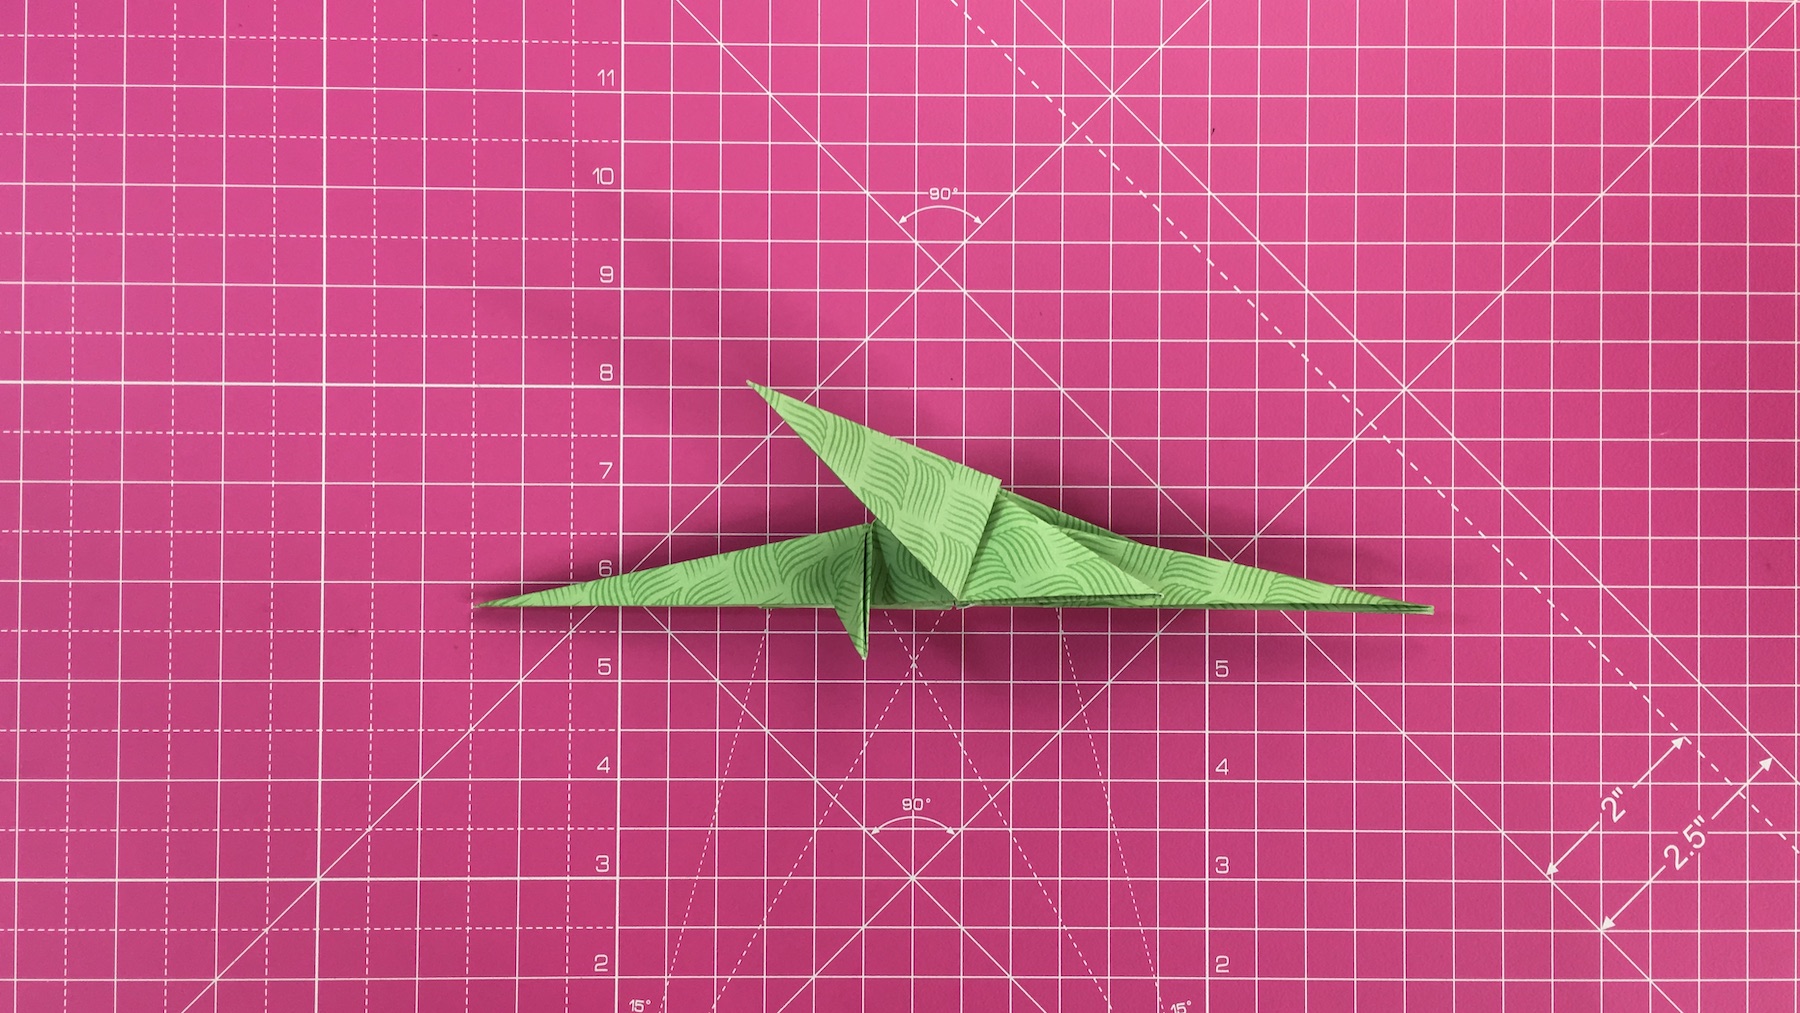 How to make an origami dragon, origami dragon tutorial - step 36